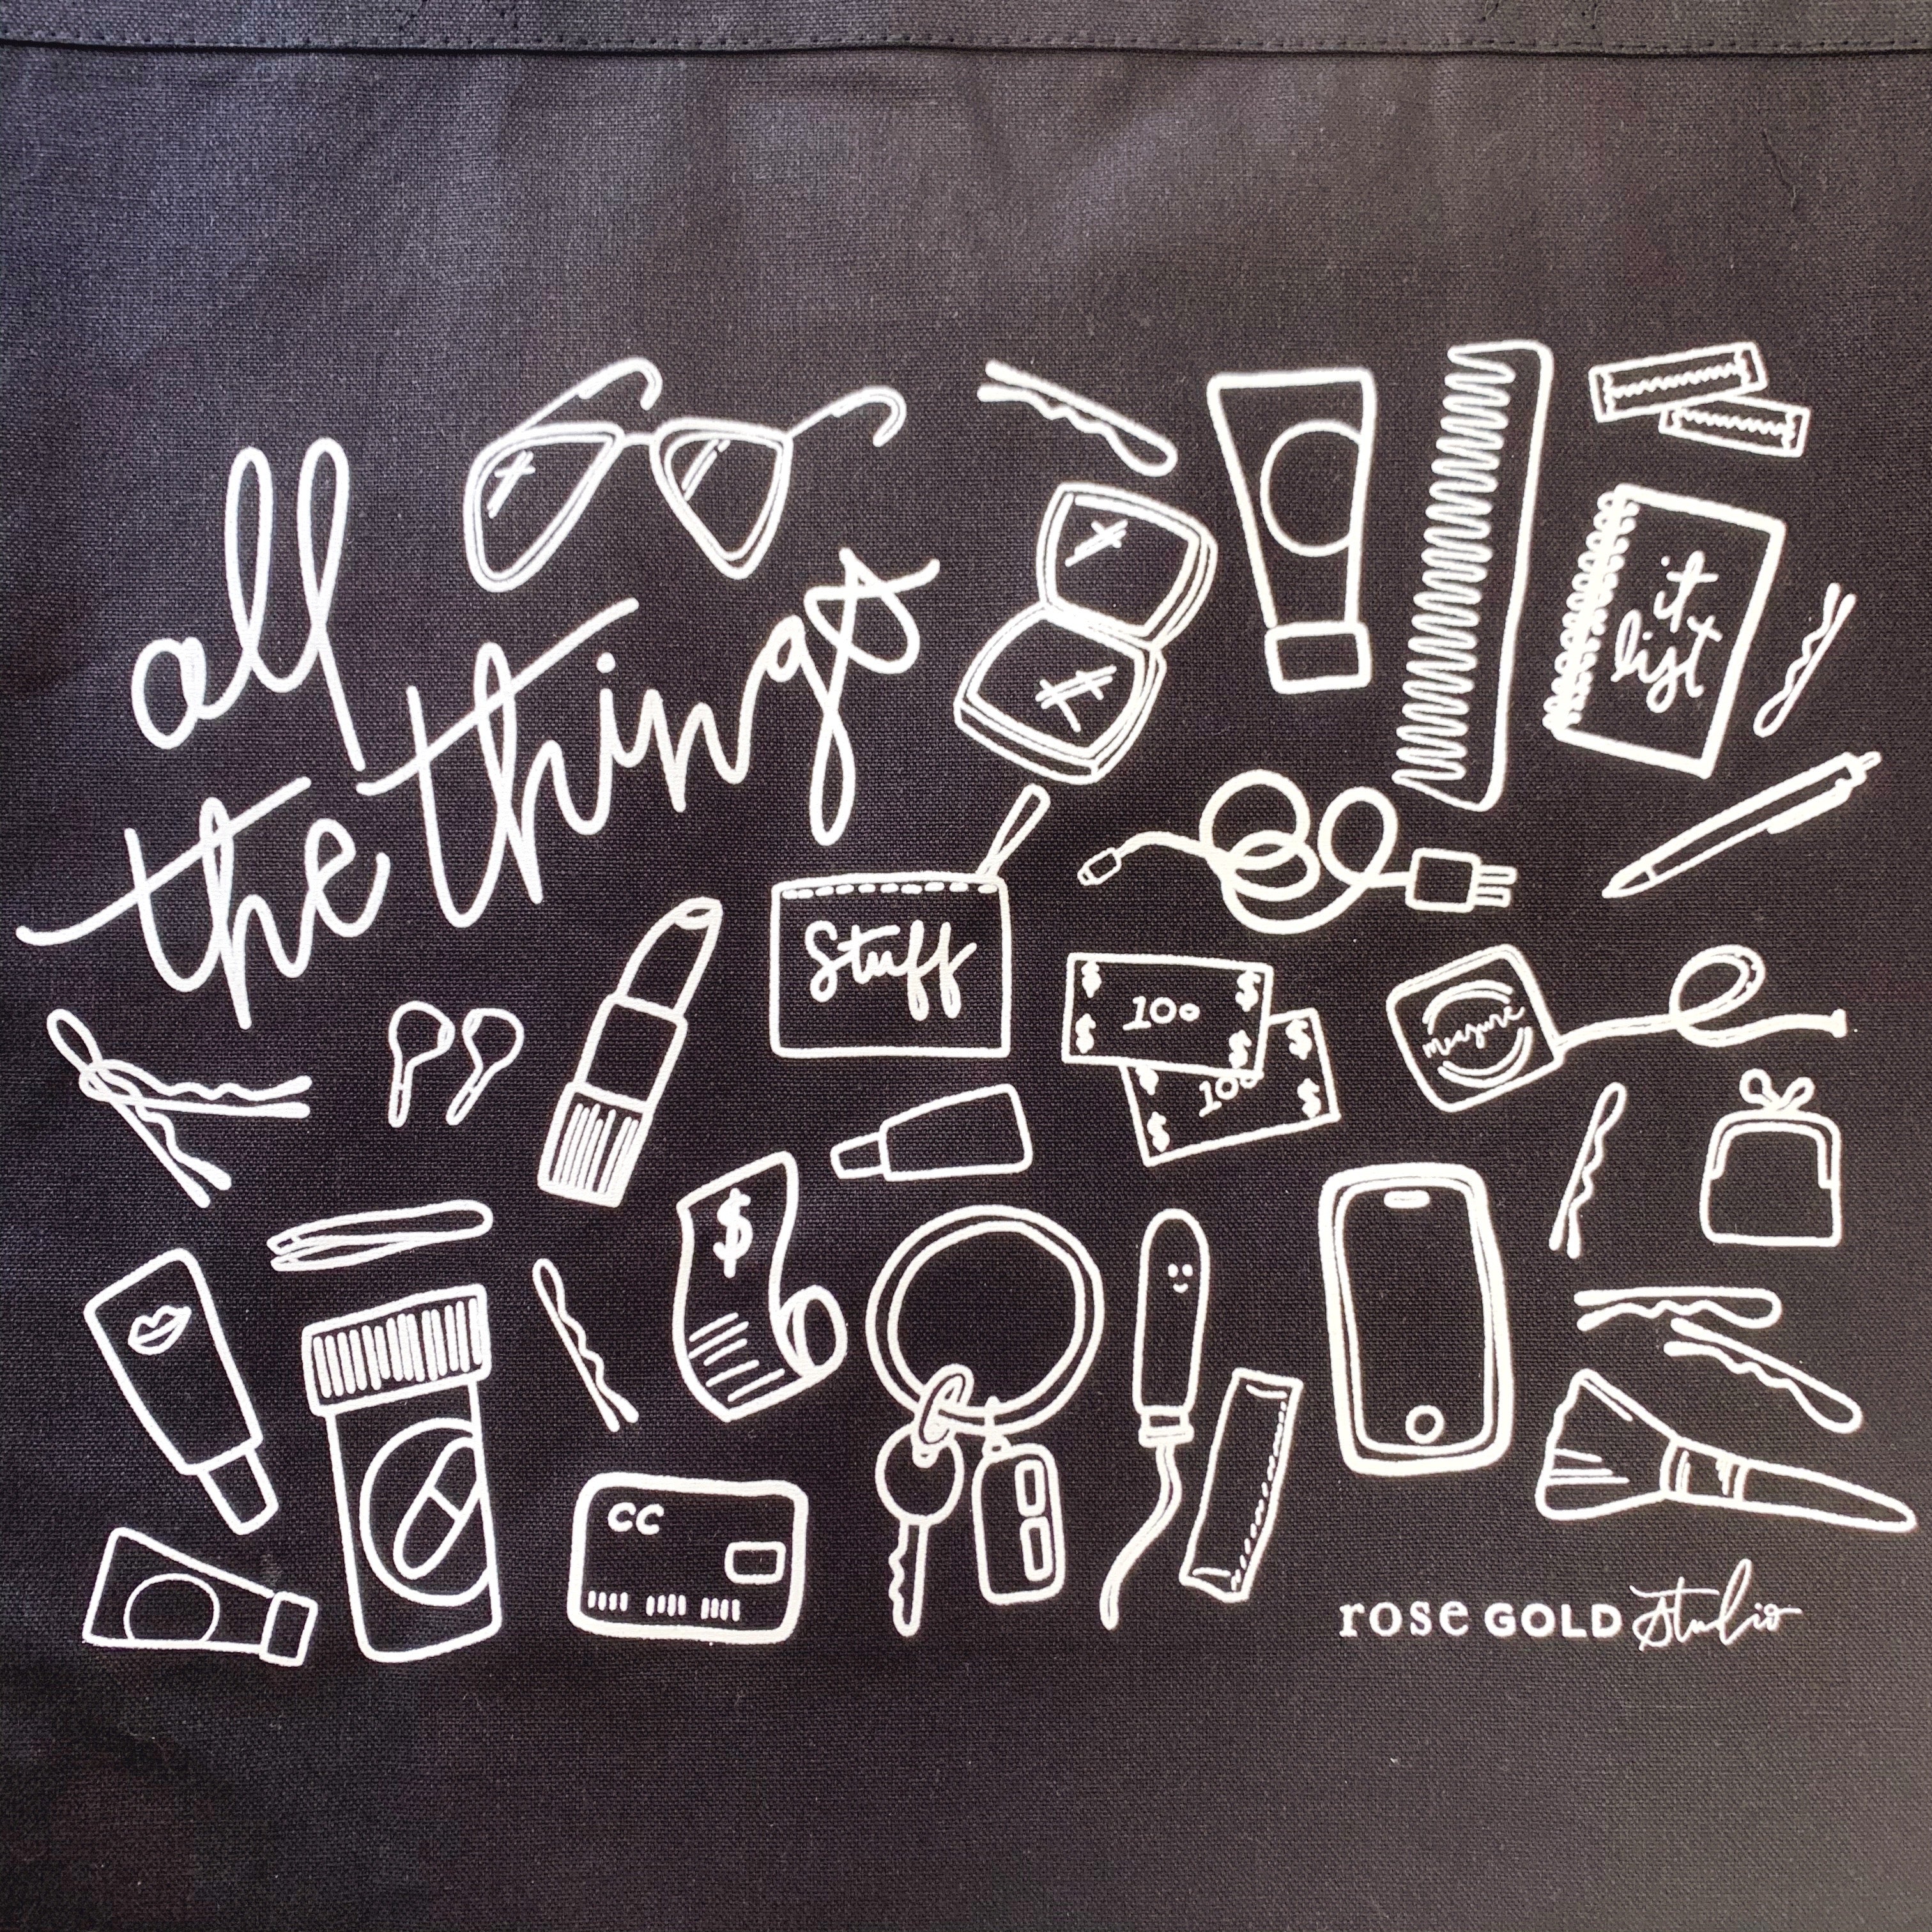 All The Things tote bag